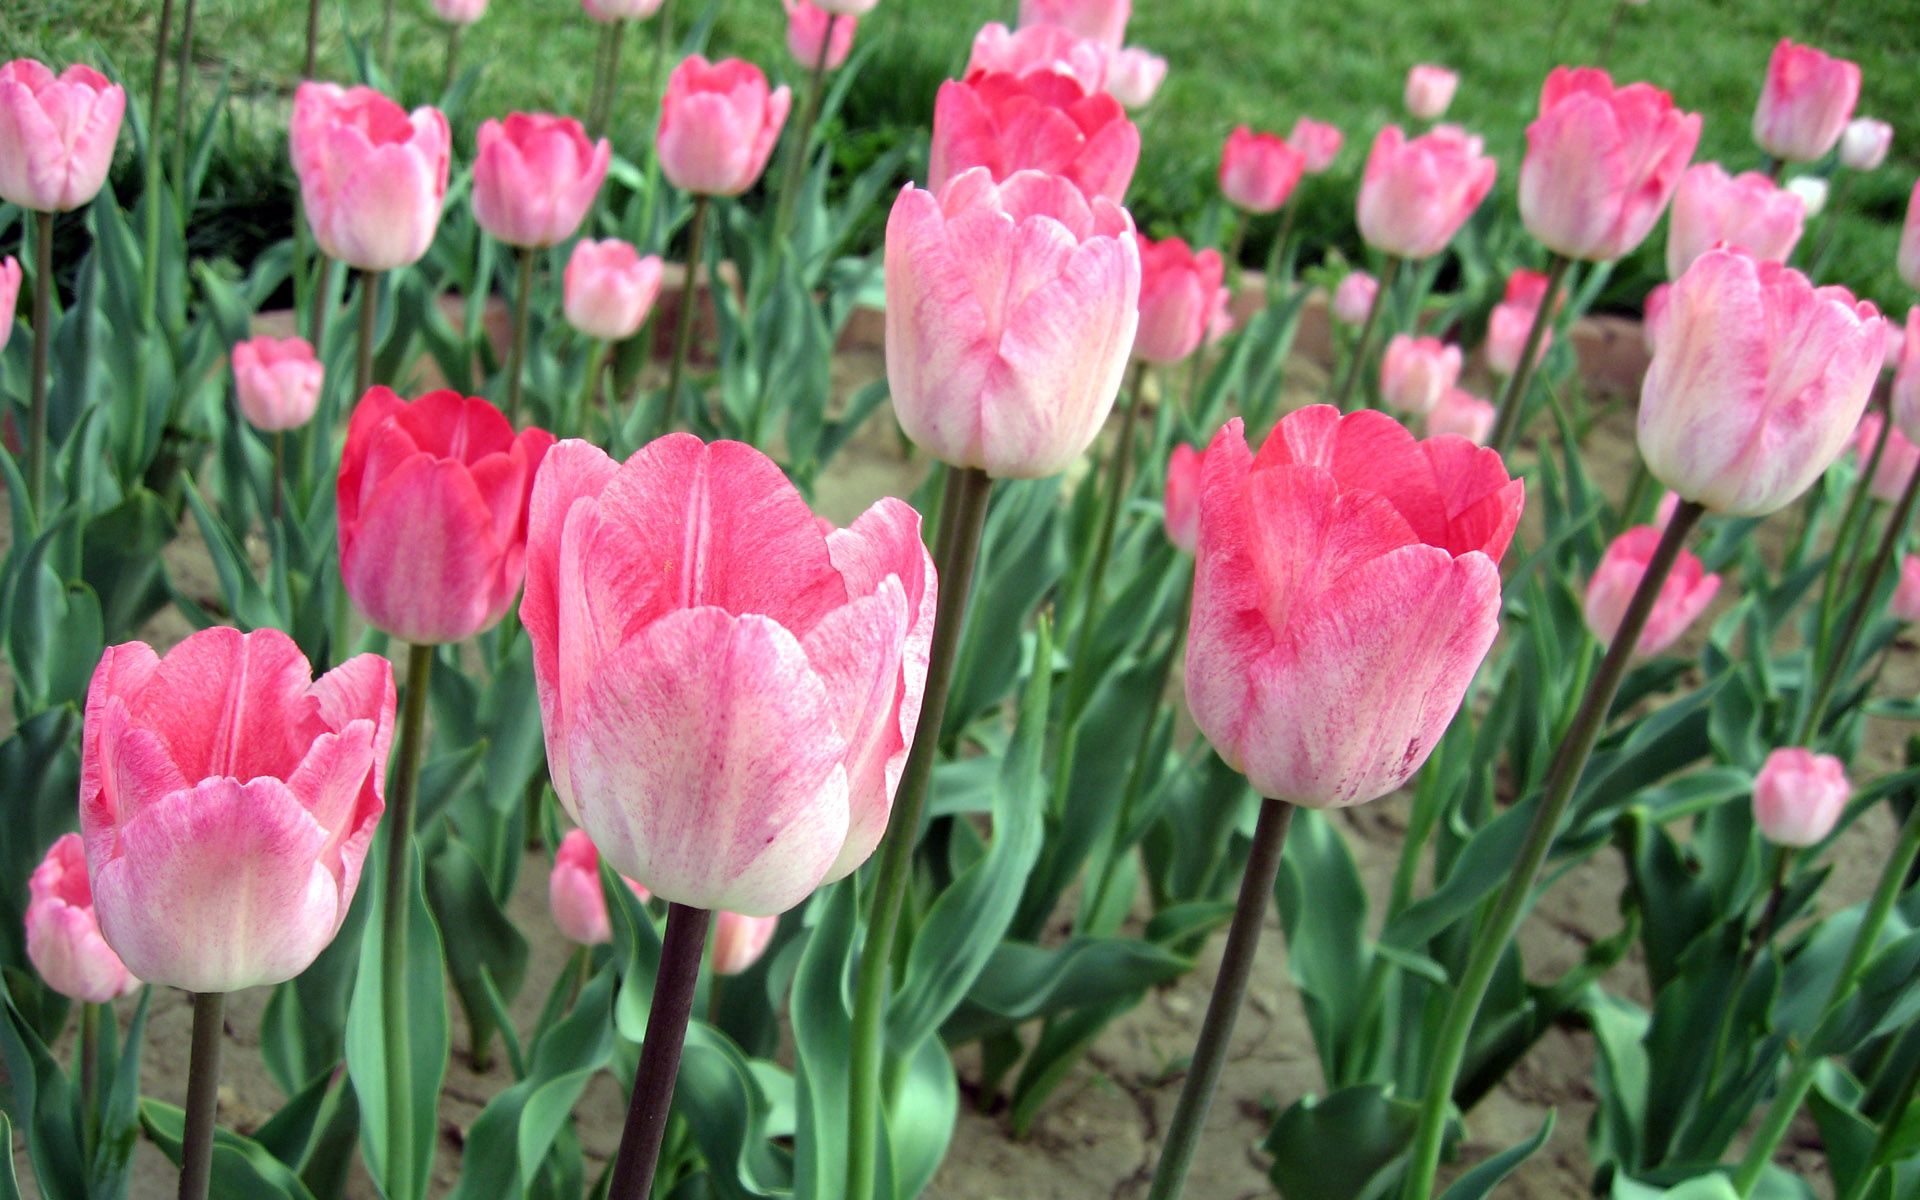 flowers, pink, tulips, greens, flower bed, flowerbed wallpaper for mobile